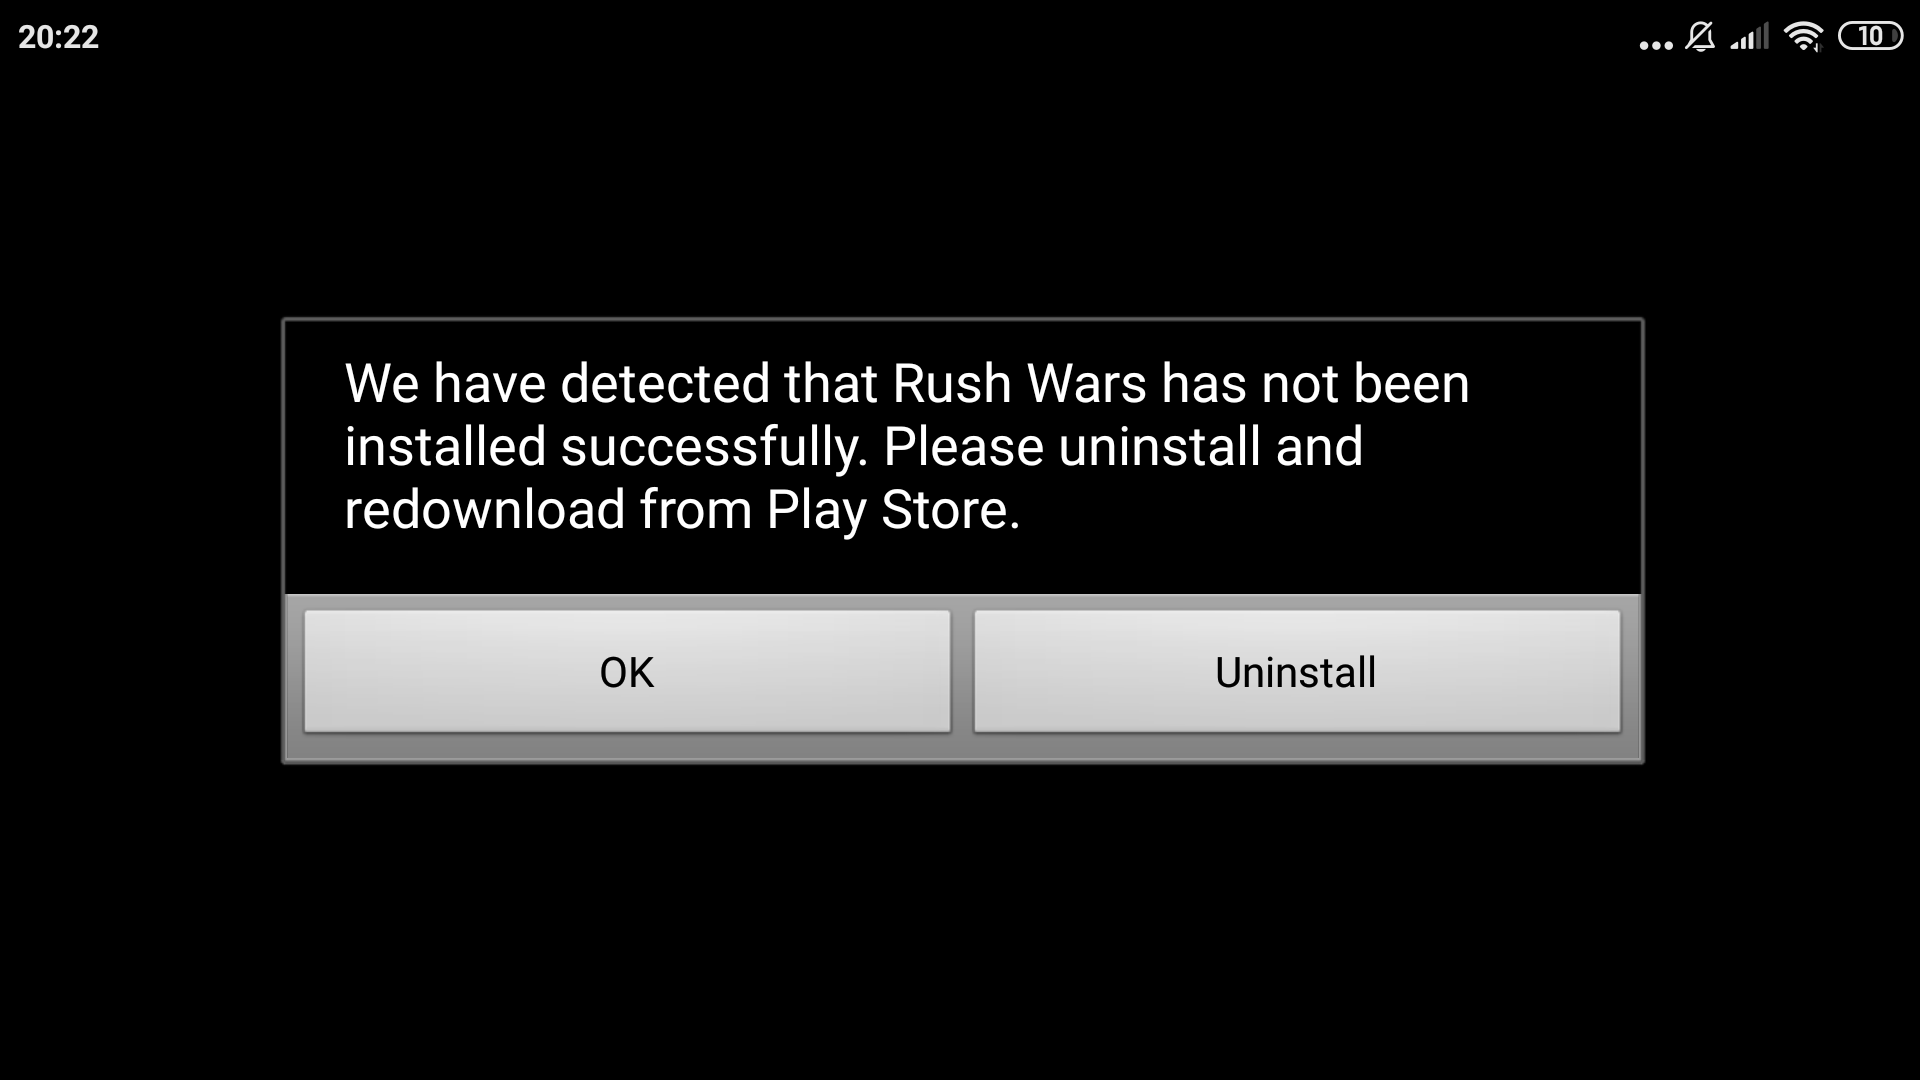 Collection has not. We have detected that Brawl Stars has not been installed successfully.